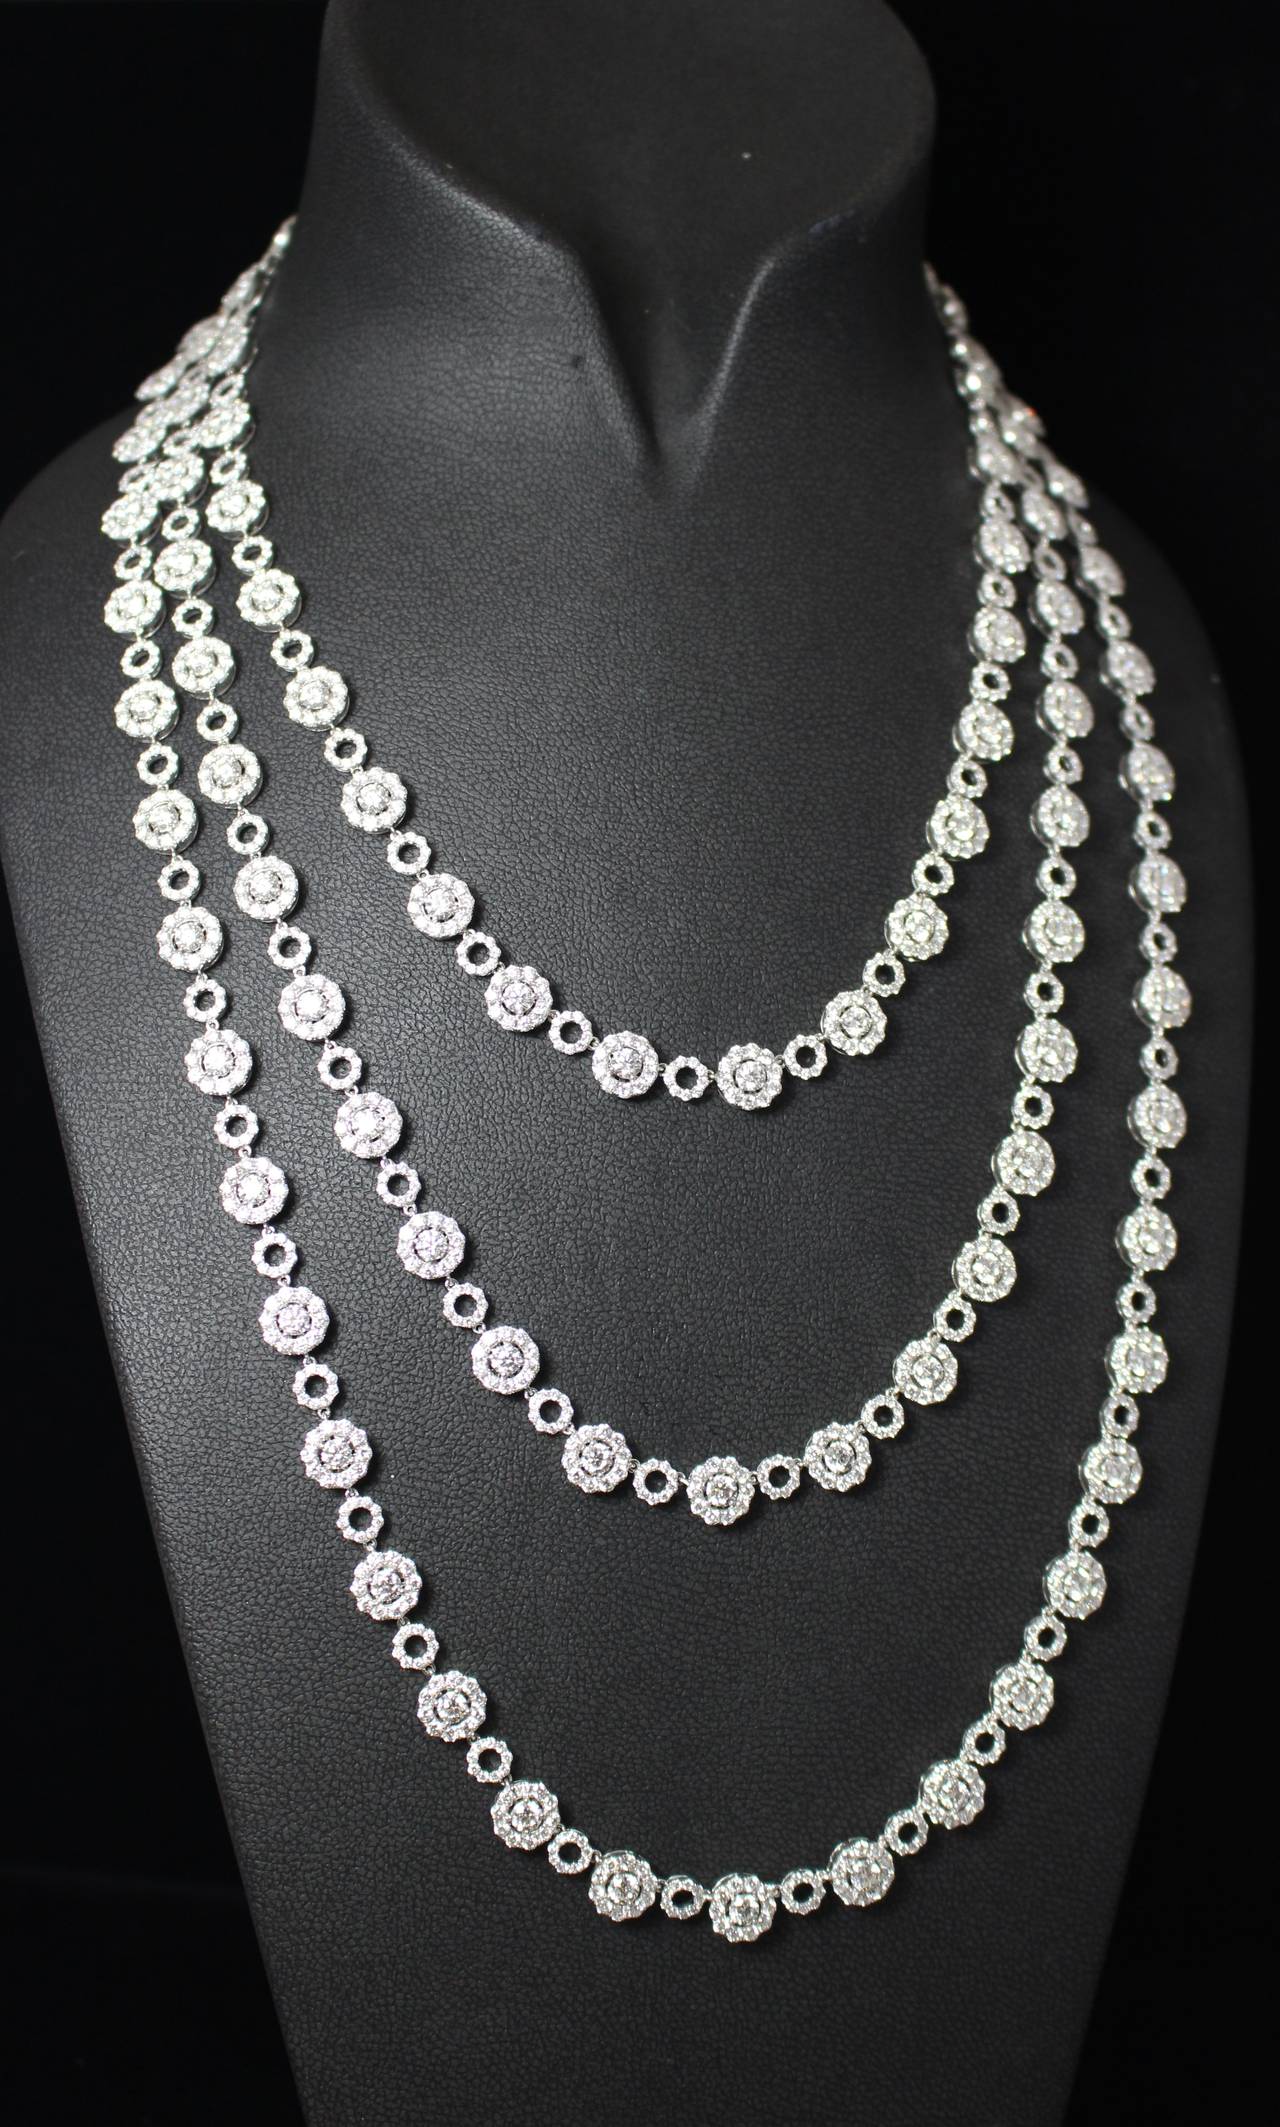 60.18 Carats Diamonds Gold Necklace  In Excellent Condition For Sale In Los Angeles, CA